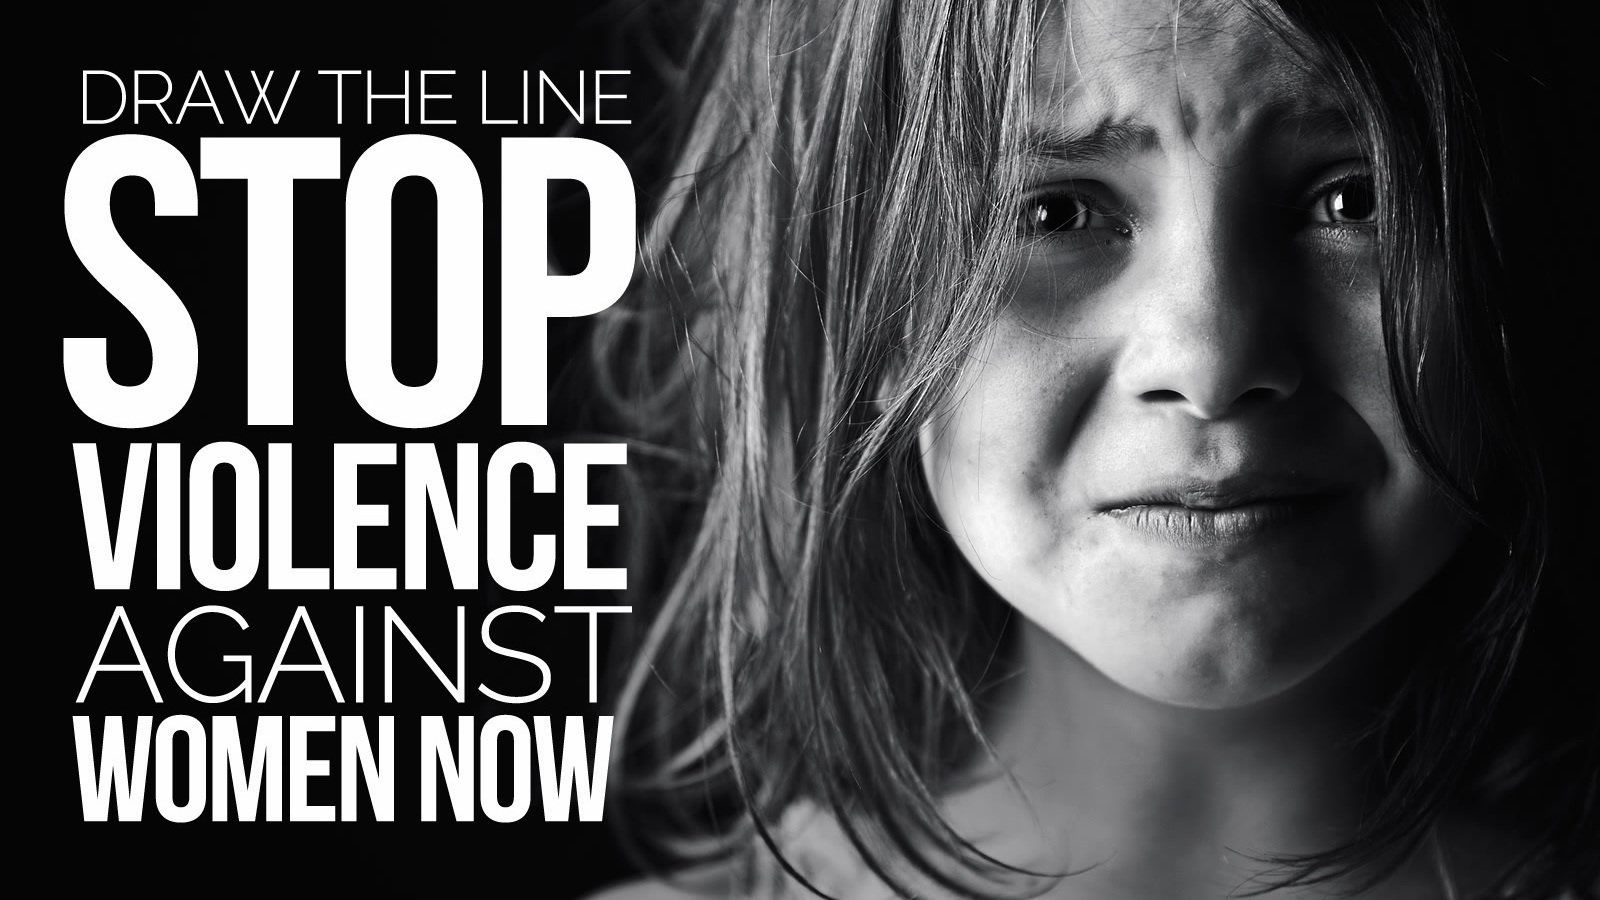 Petition · Department of Education: DRAW THE LINE: Stop Violence